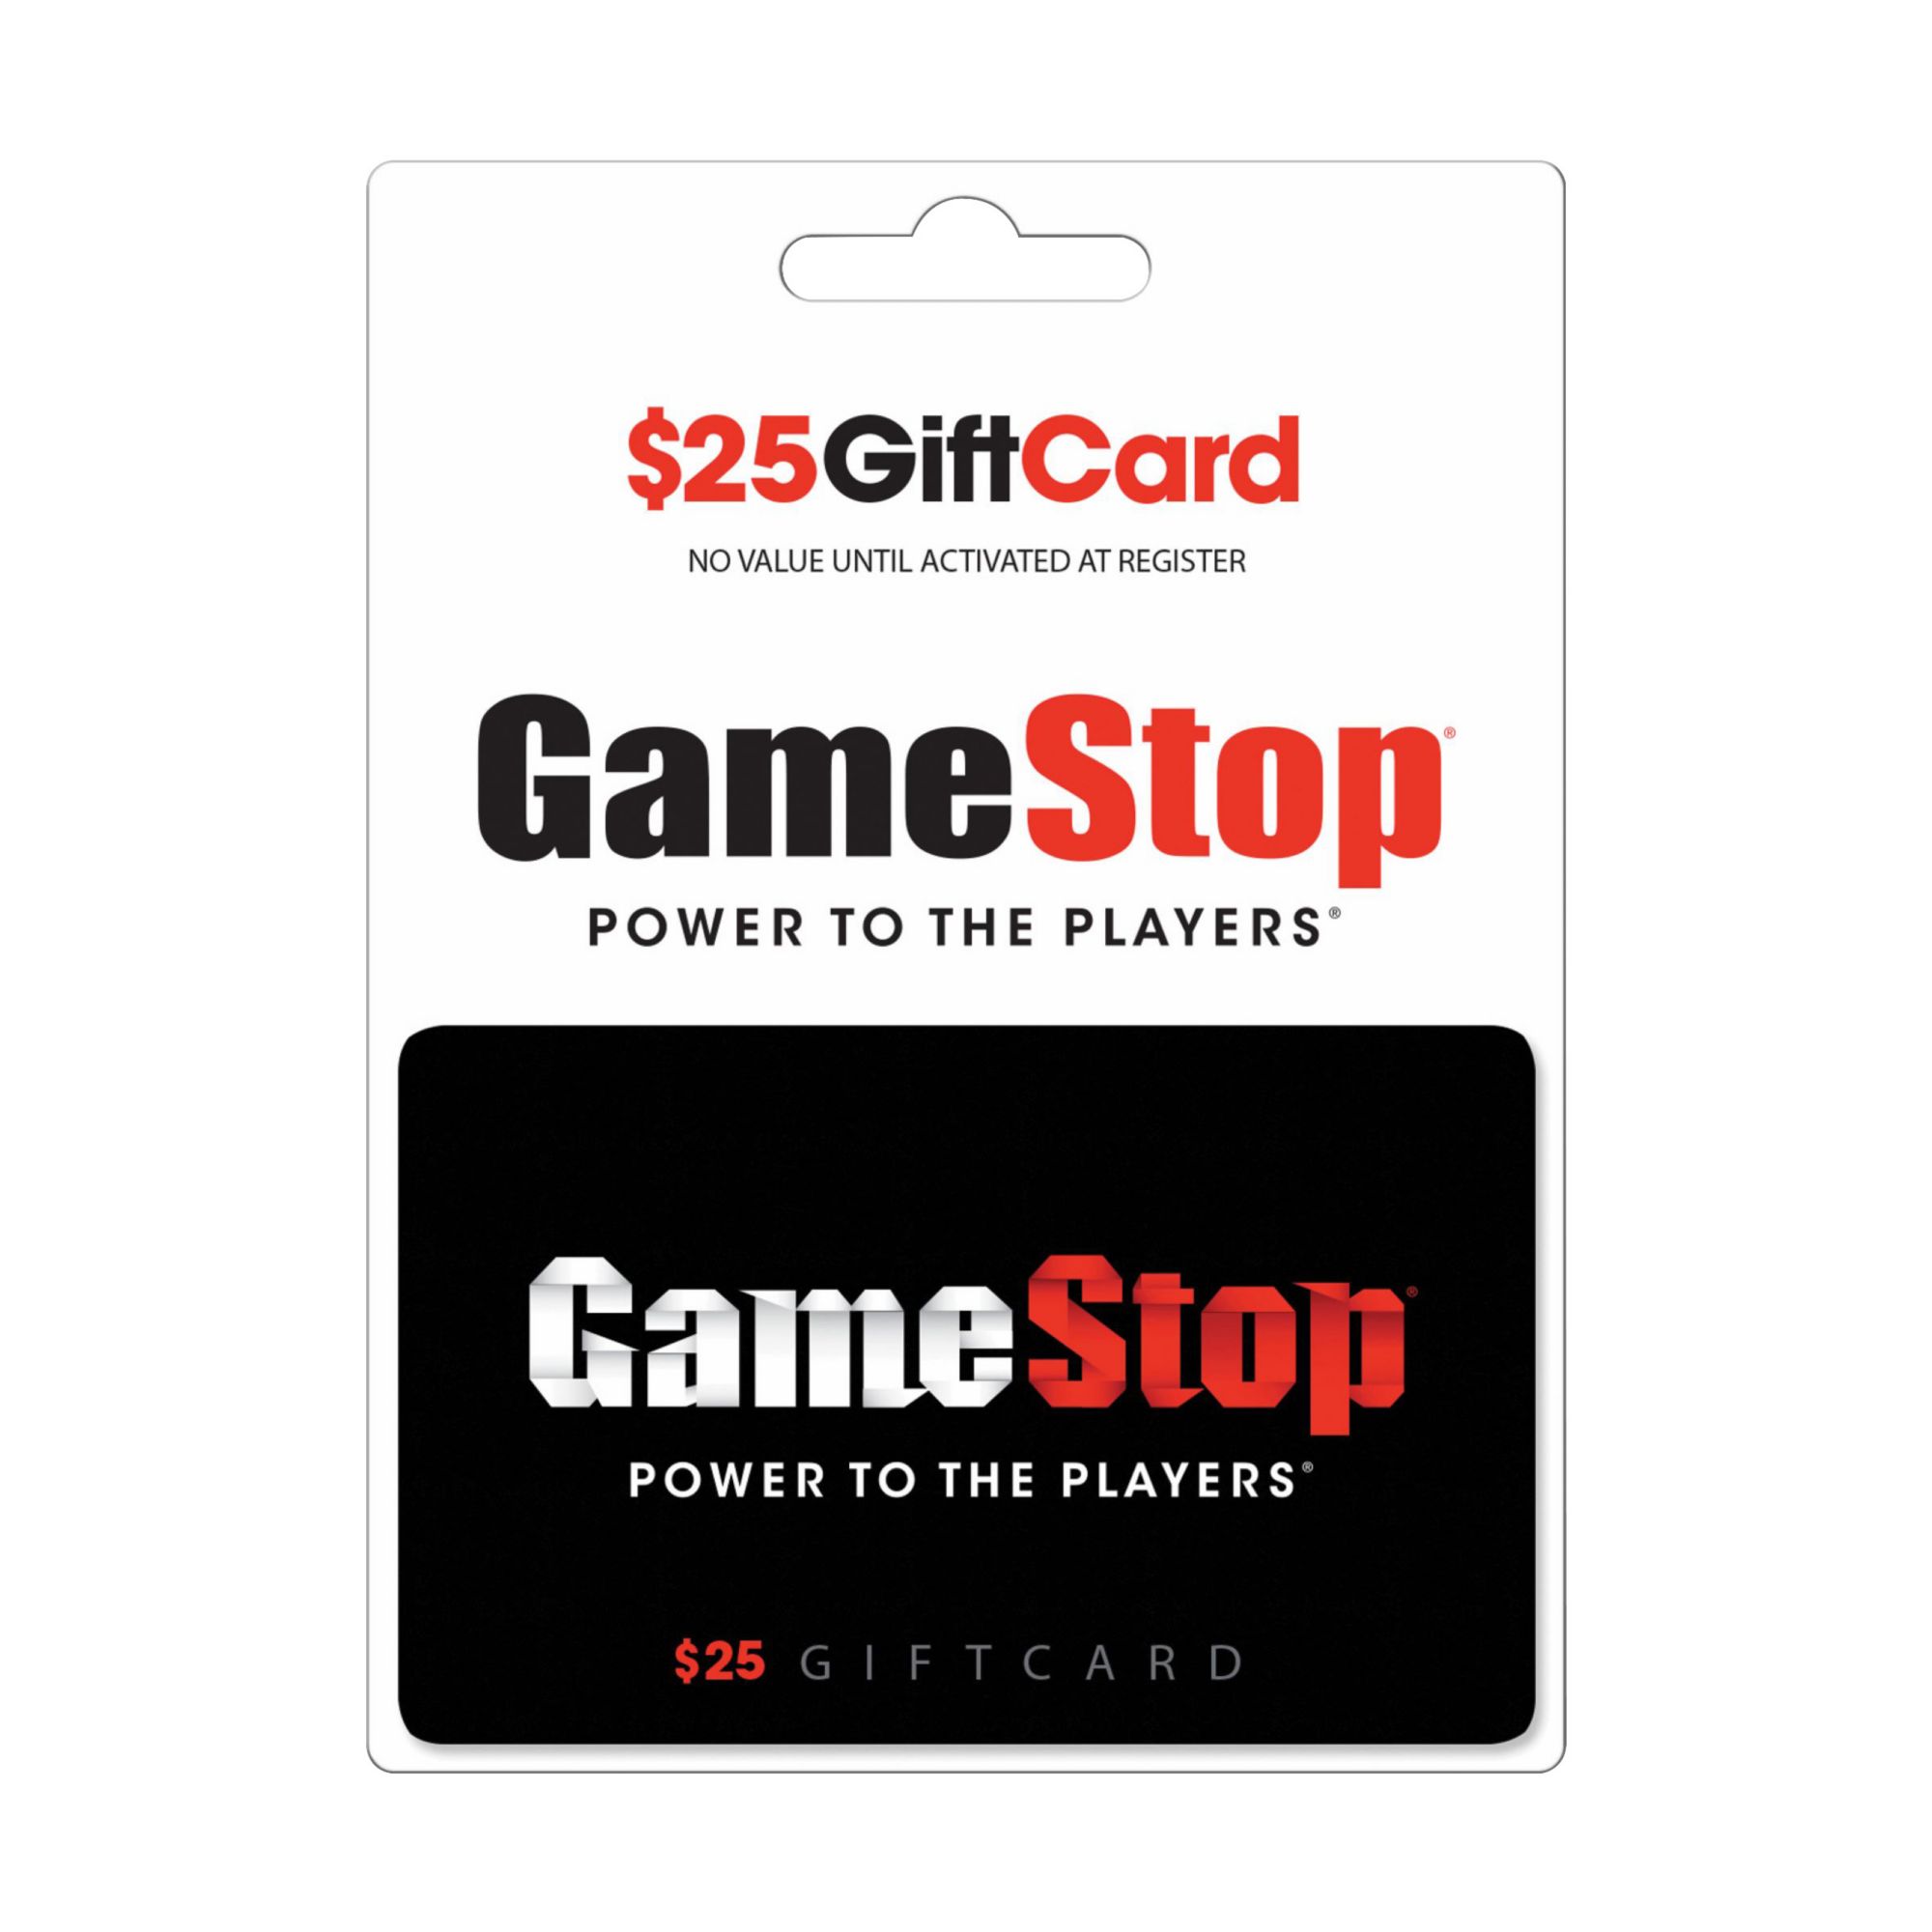 Made sure to buy gift cards at Gamestop for the PS store black Friday  deals. Worth the extra step to clock revenue for my company. : r/Superstonk